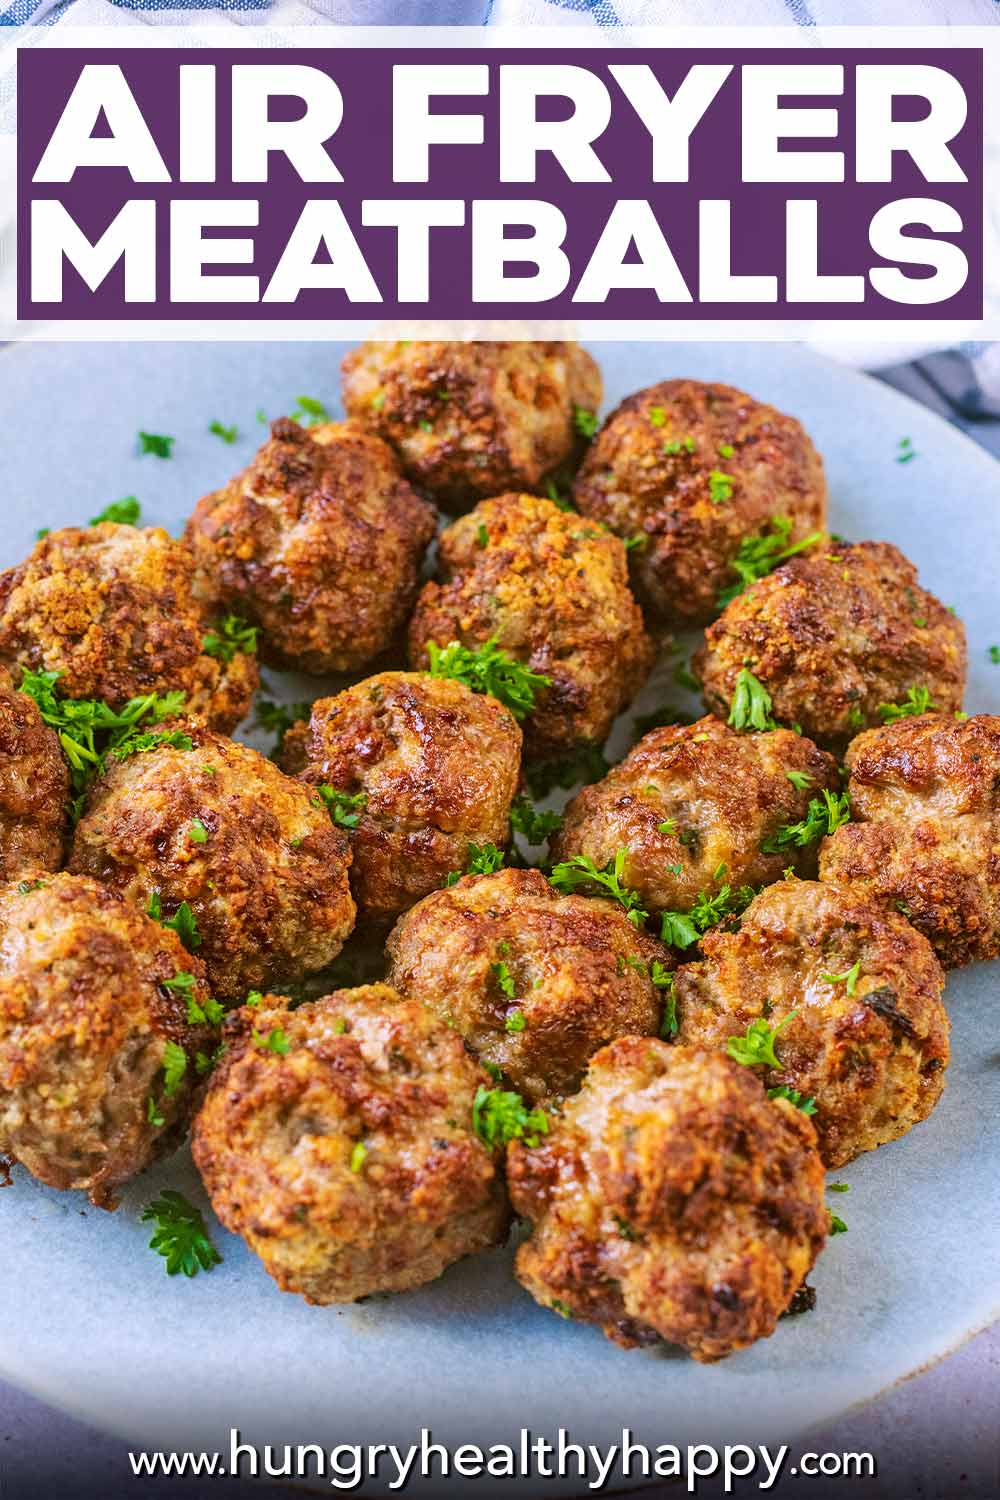 Air Fryer Meatballs - Hungry Healthy Happy